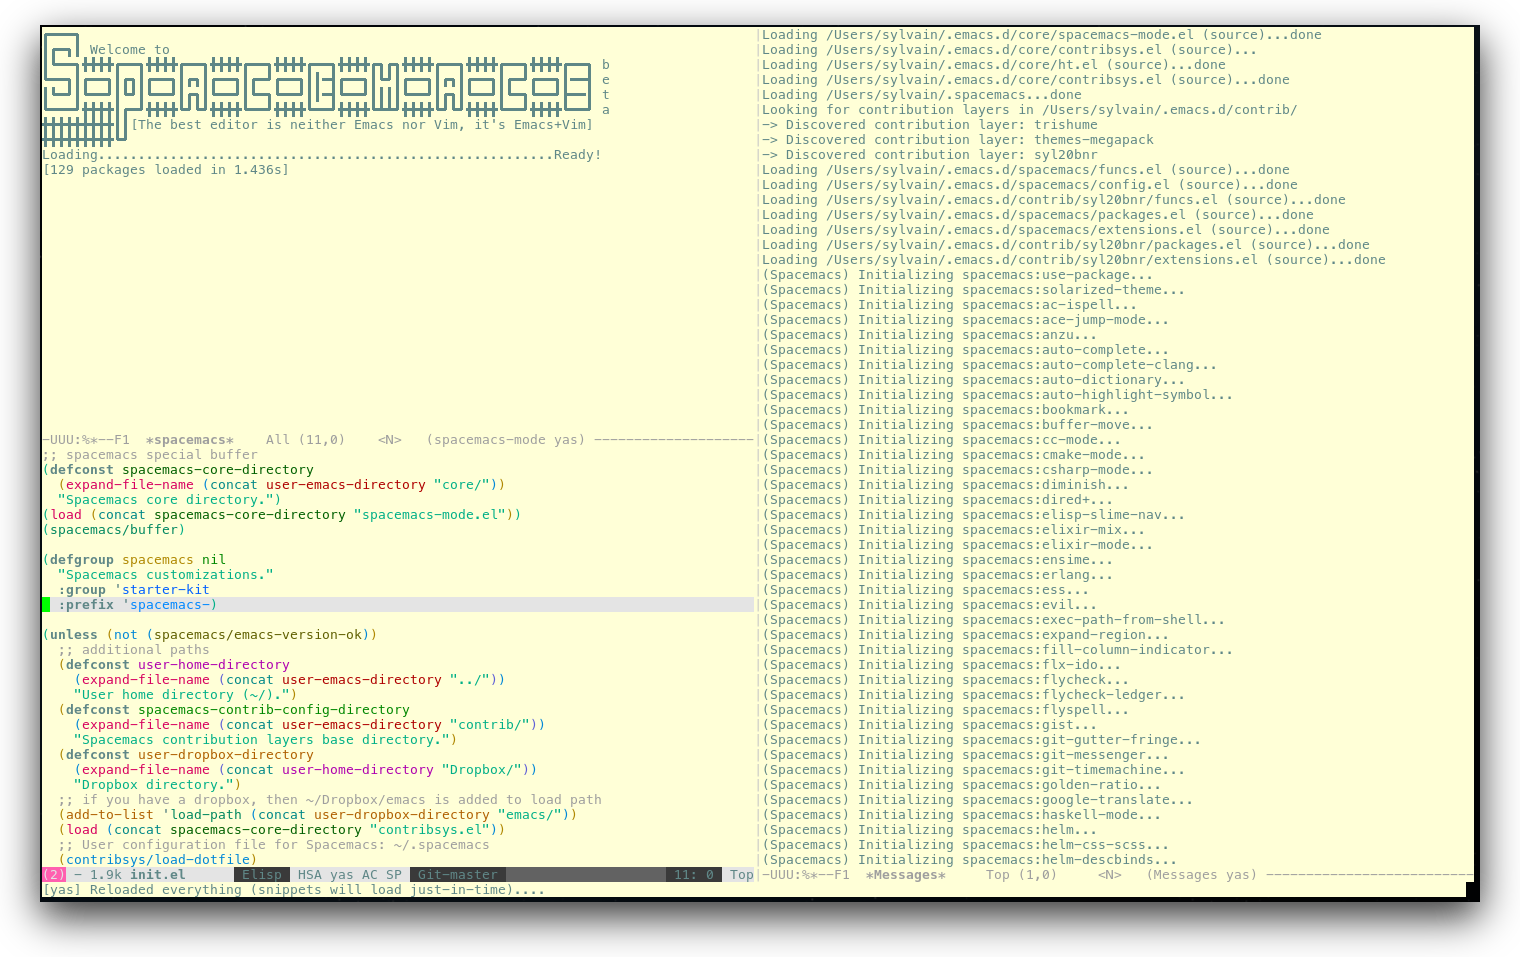 /TakeV/spacemacs/media/commit/1070d4b56a0c839a6ab4bc07fca325481e404f86/doc/img/spacemacs-urxvt.png